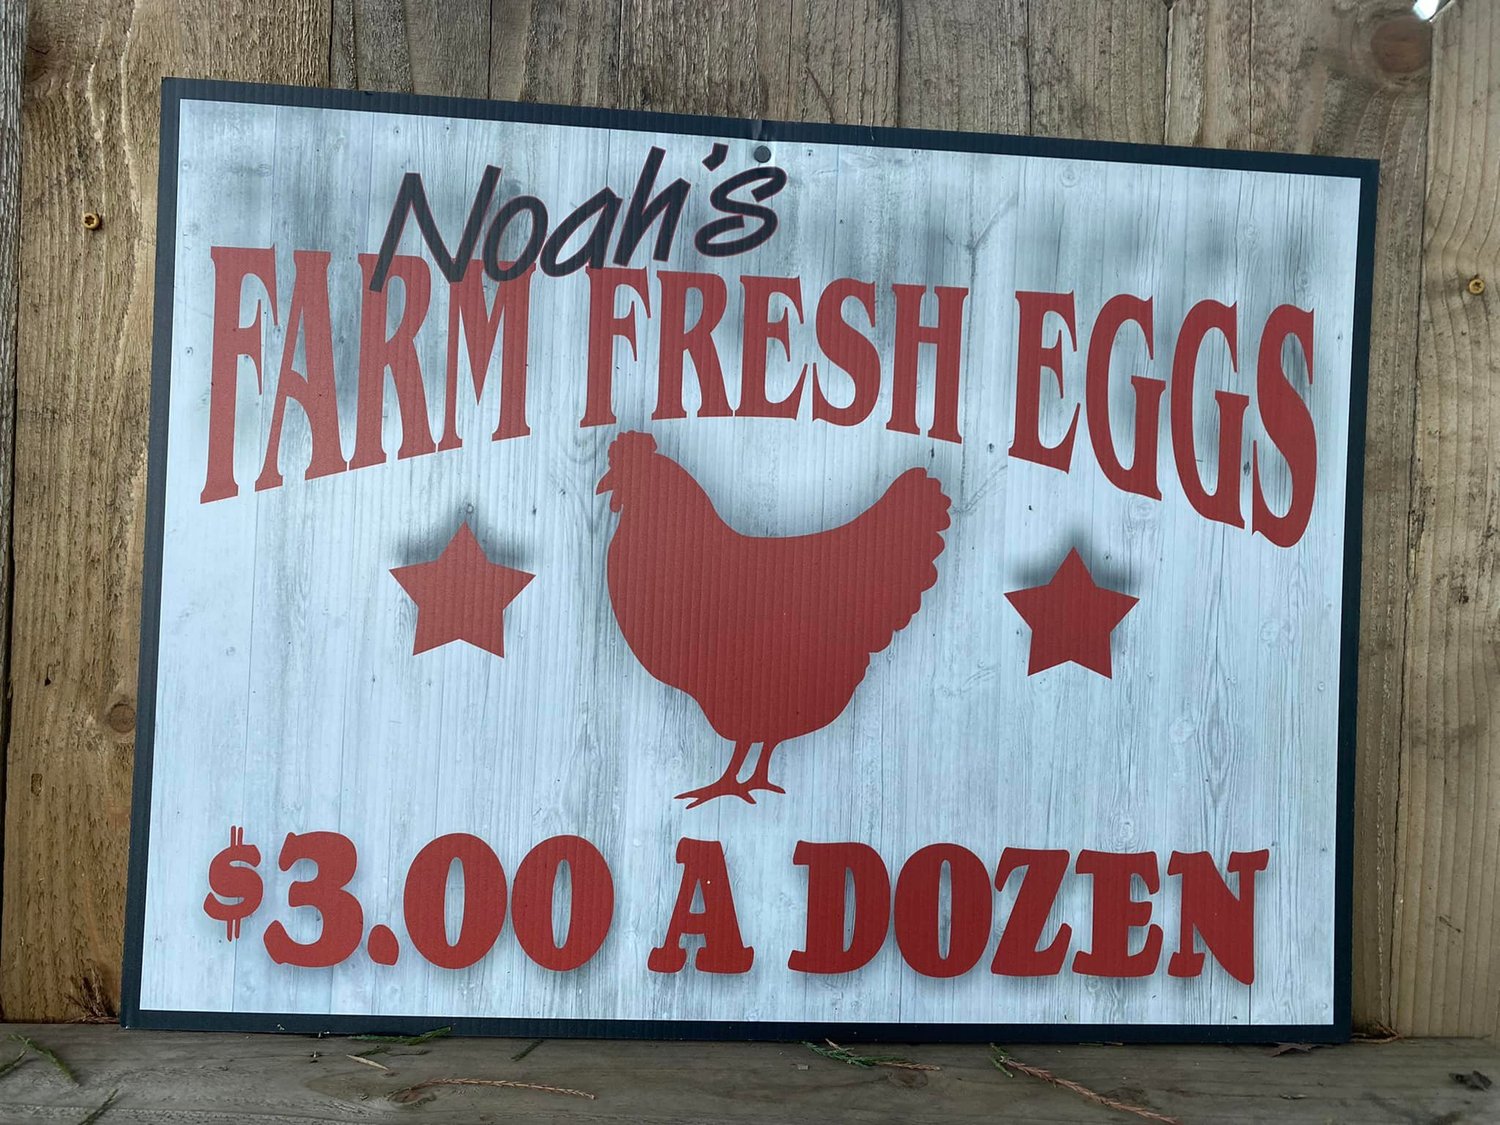 The sign for Noah’s Farm Fresh Eggs is pictured.